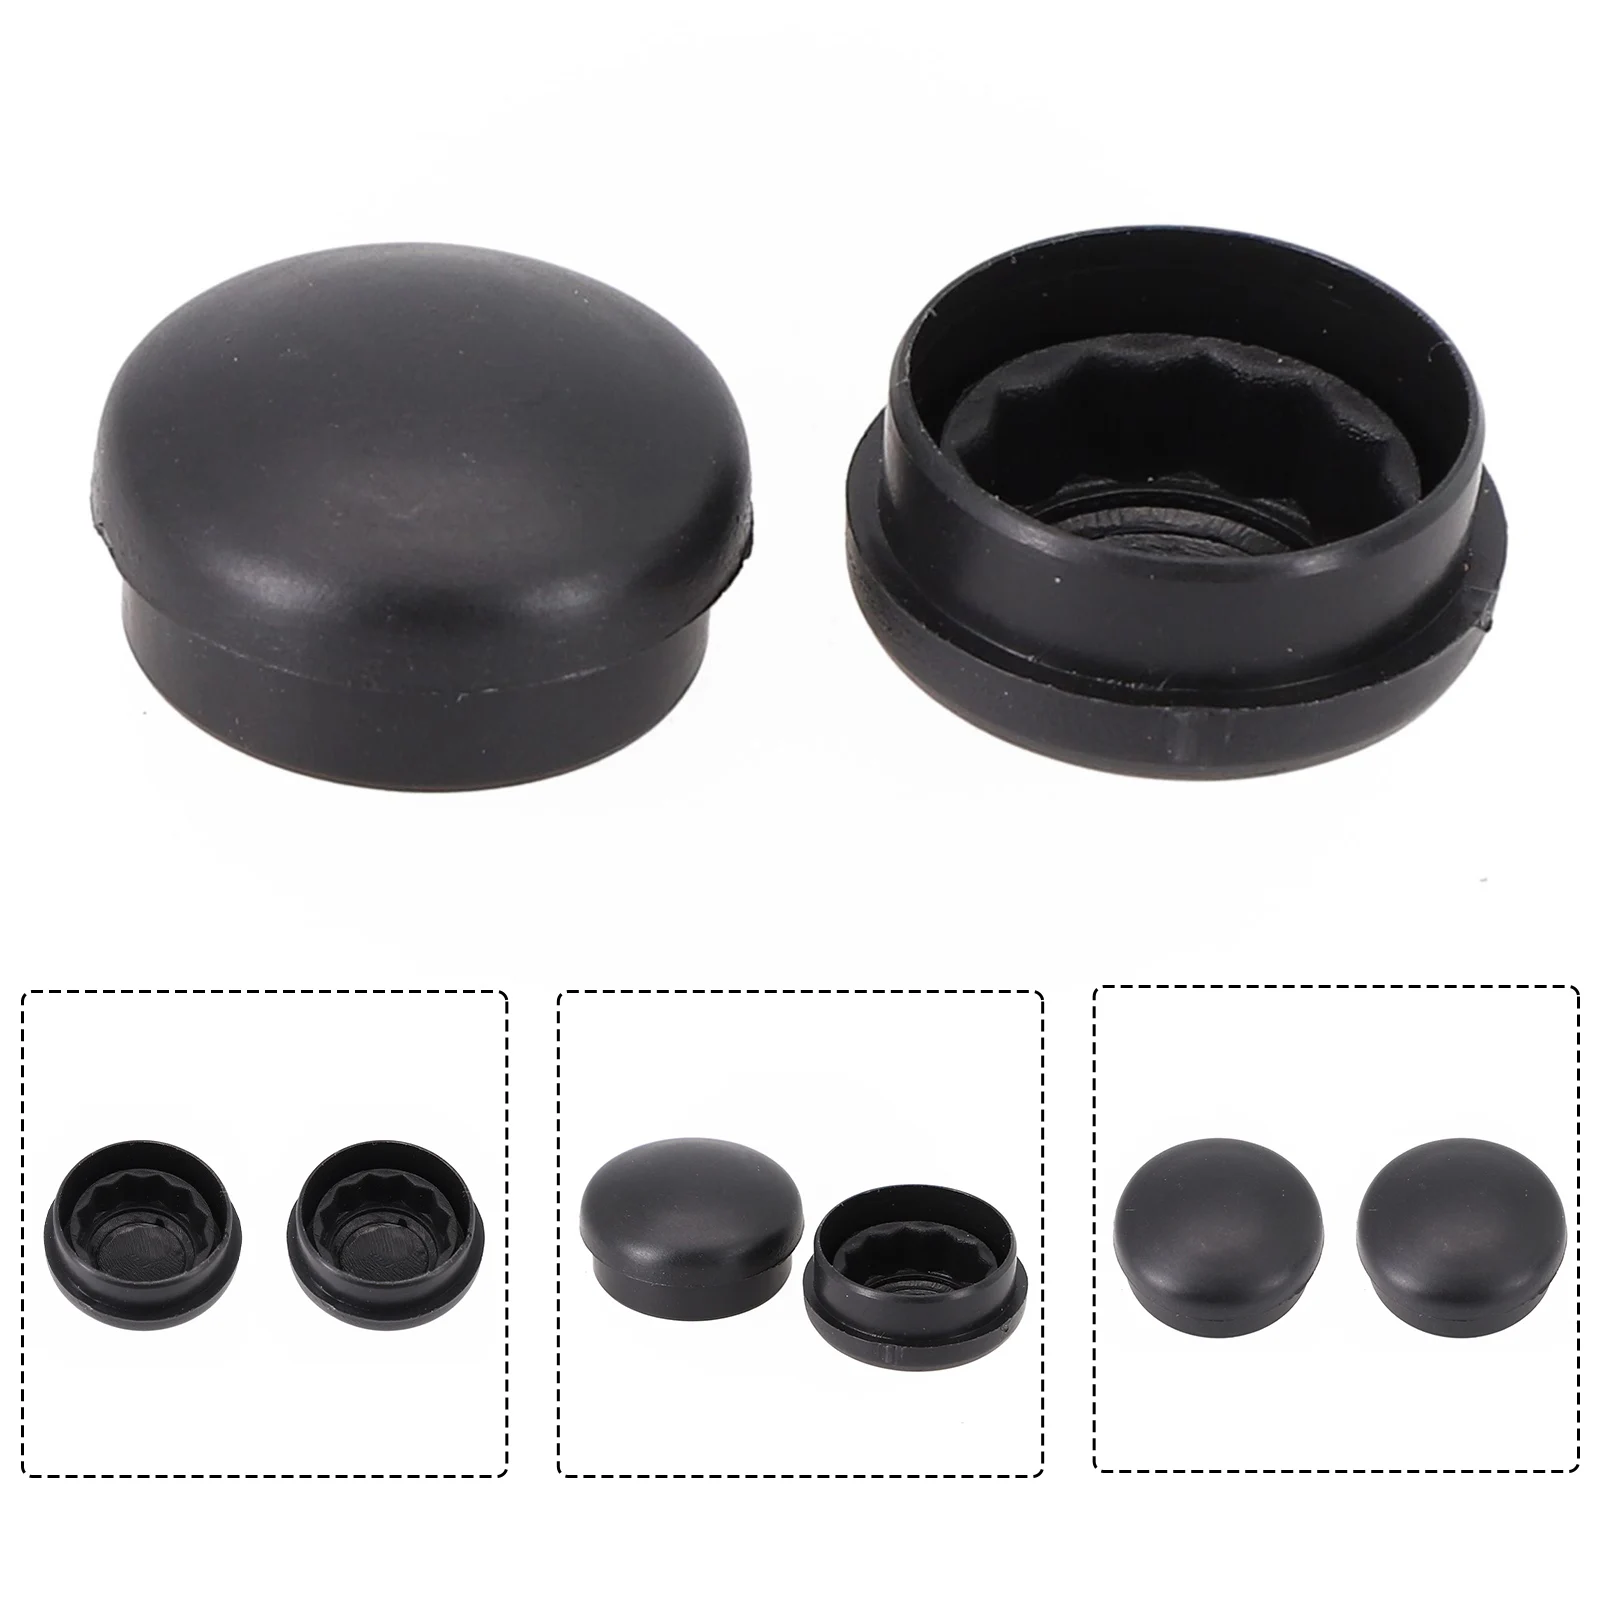 

2Pcs Wiper Arms Nut Cap For A1 2010-2018 For A2 2000-2005 For A3 2006-2019 For A4 1995-2019 For A5 2008-2019 For A6 1995-2018